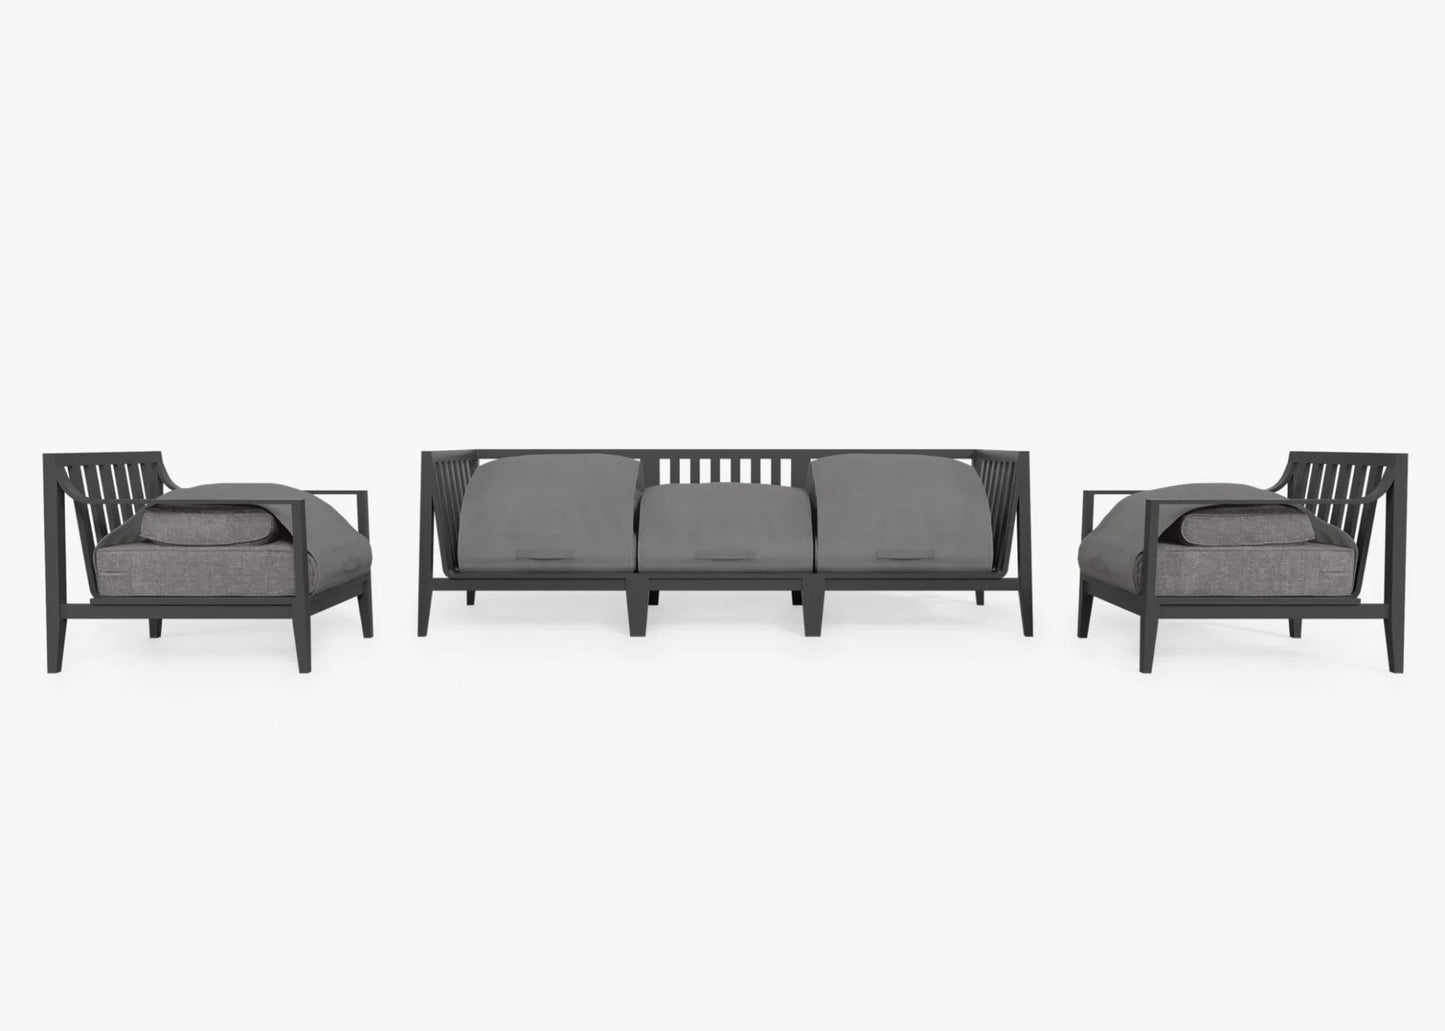 Live Outer 98" Charcoal Aluminum Outdoor Sofa With Armchairs and Dark Pebble Gray Cushion (5-Seat)